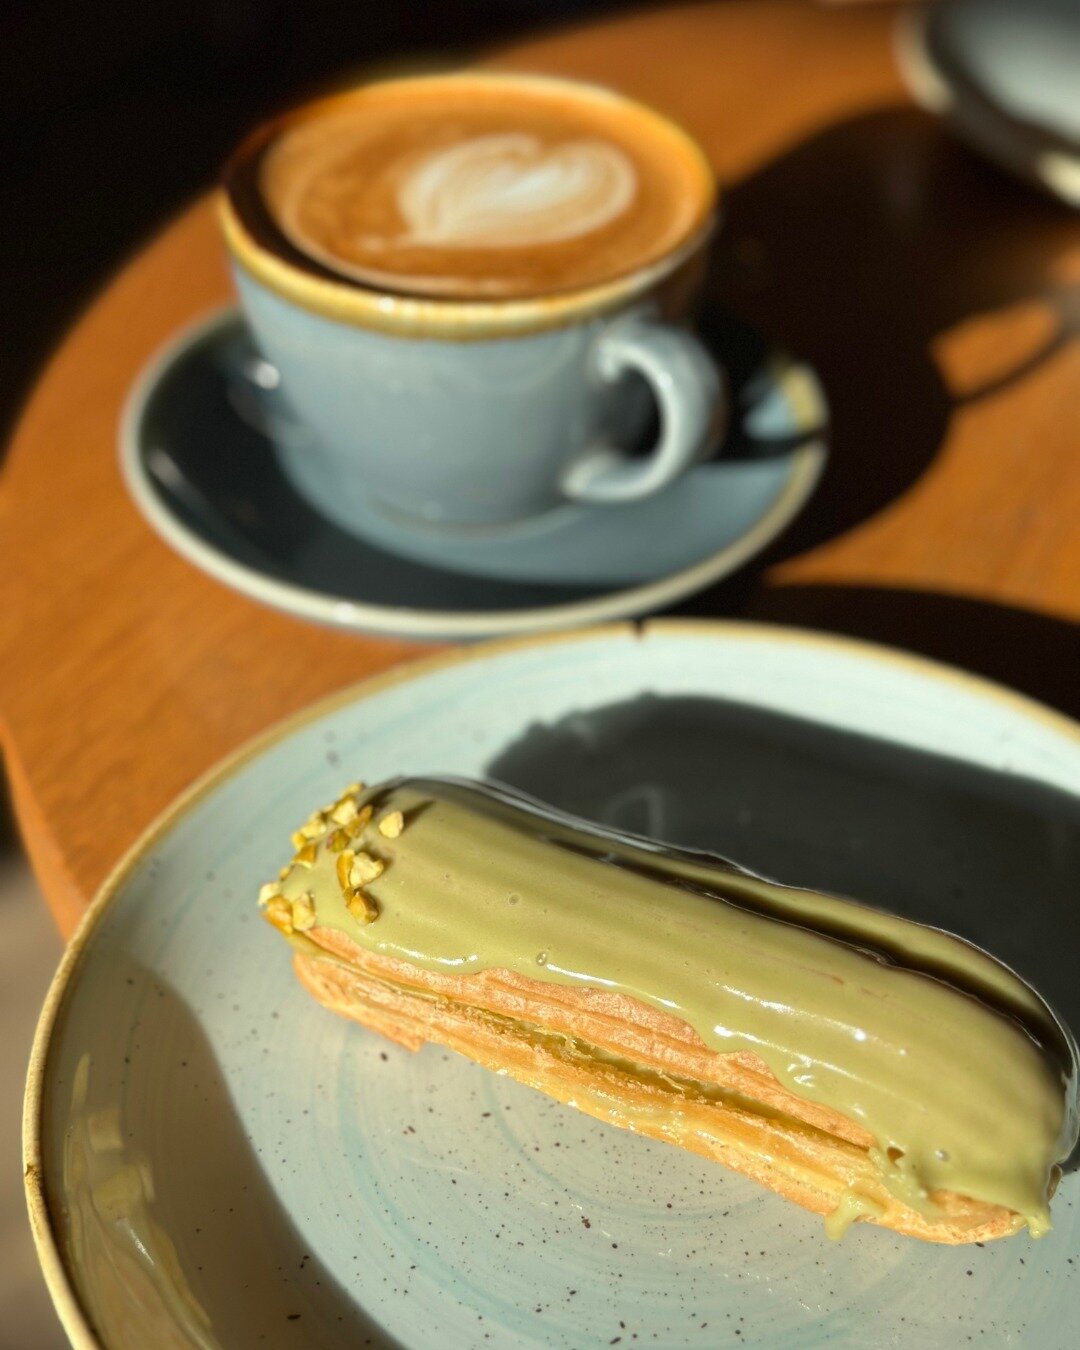 Pistachio Eclair on this fine Tuesday? 

flavours and vibes are on us! 😊 

#frenchcafe #morningcoffee #cosycafe  #frenchpatisserie #frenchbakery #pastry
#westlondon #coffee #eastlondon #zone2 #zone3 #bexley #ealing #actoncentral #dartford #plumstead